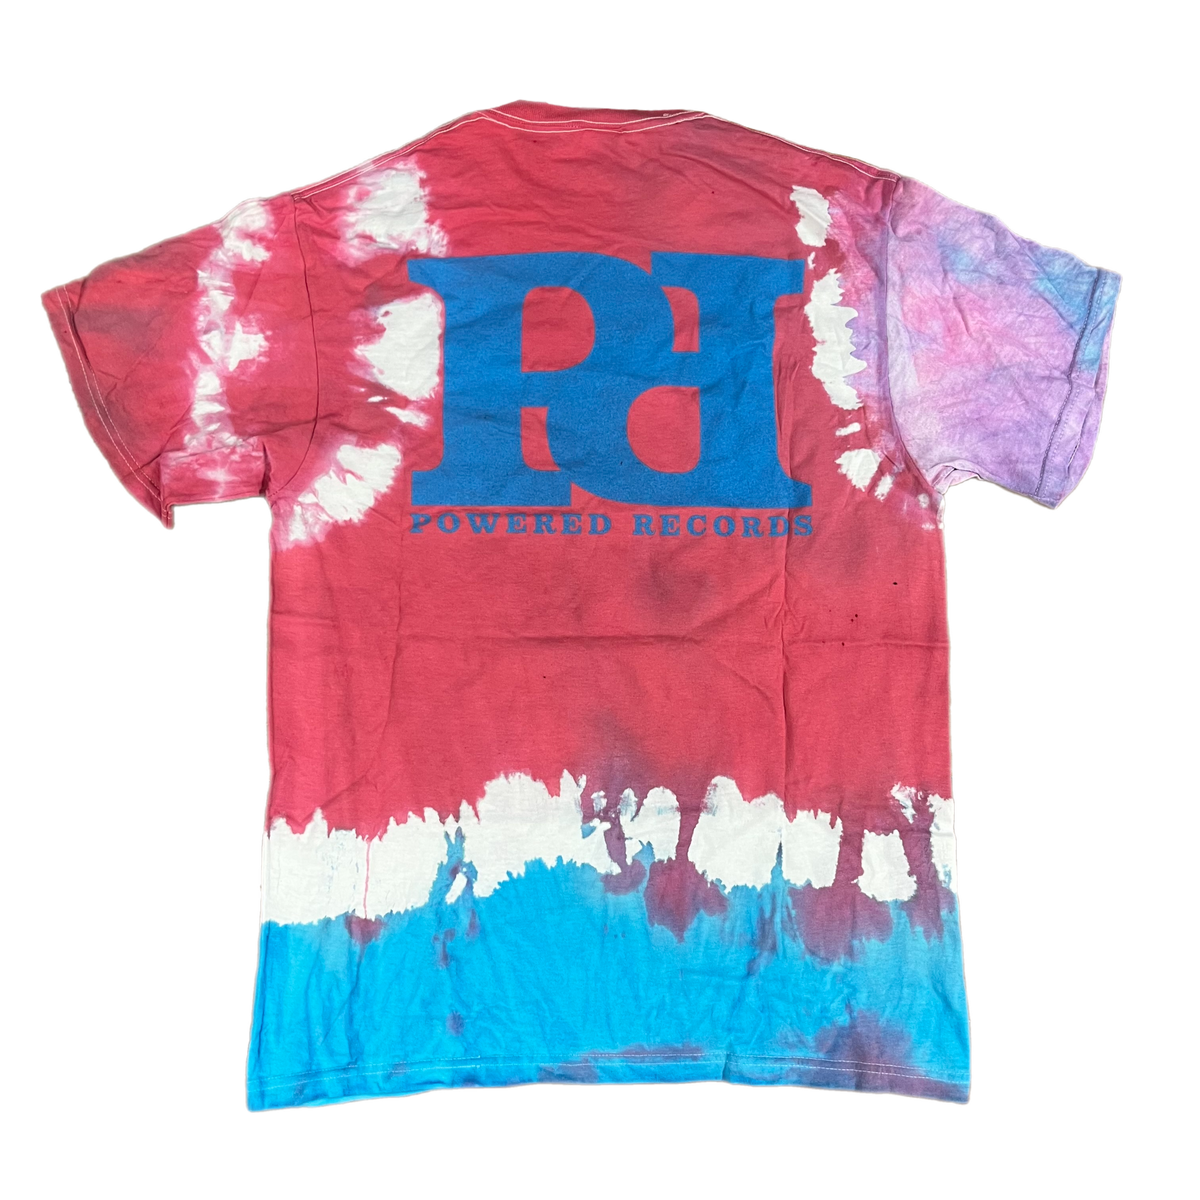 Justice &quot;Live And Learn&quot; Tie Dye T-Shirt